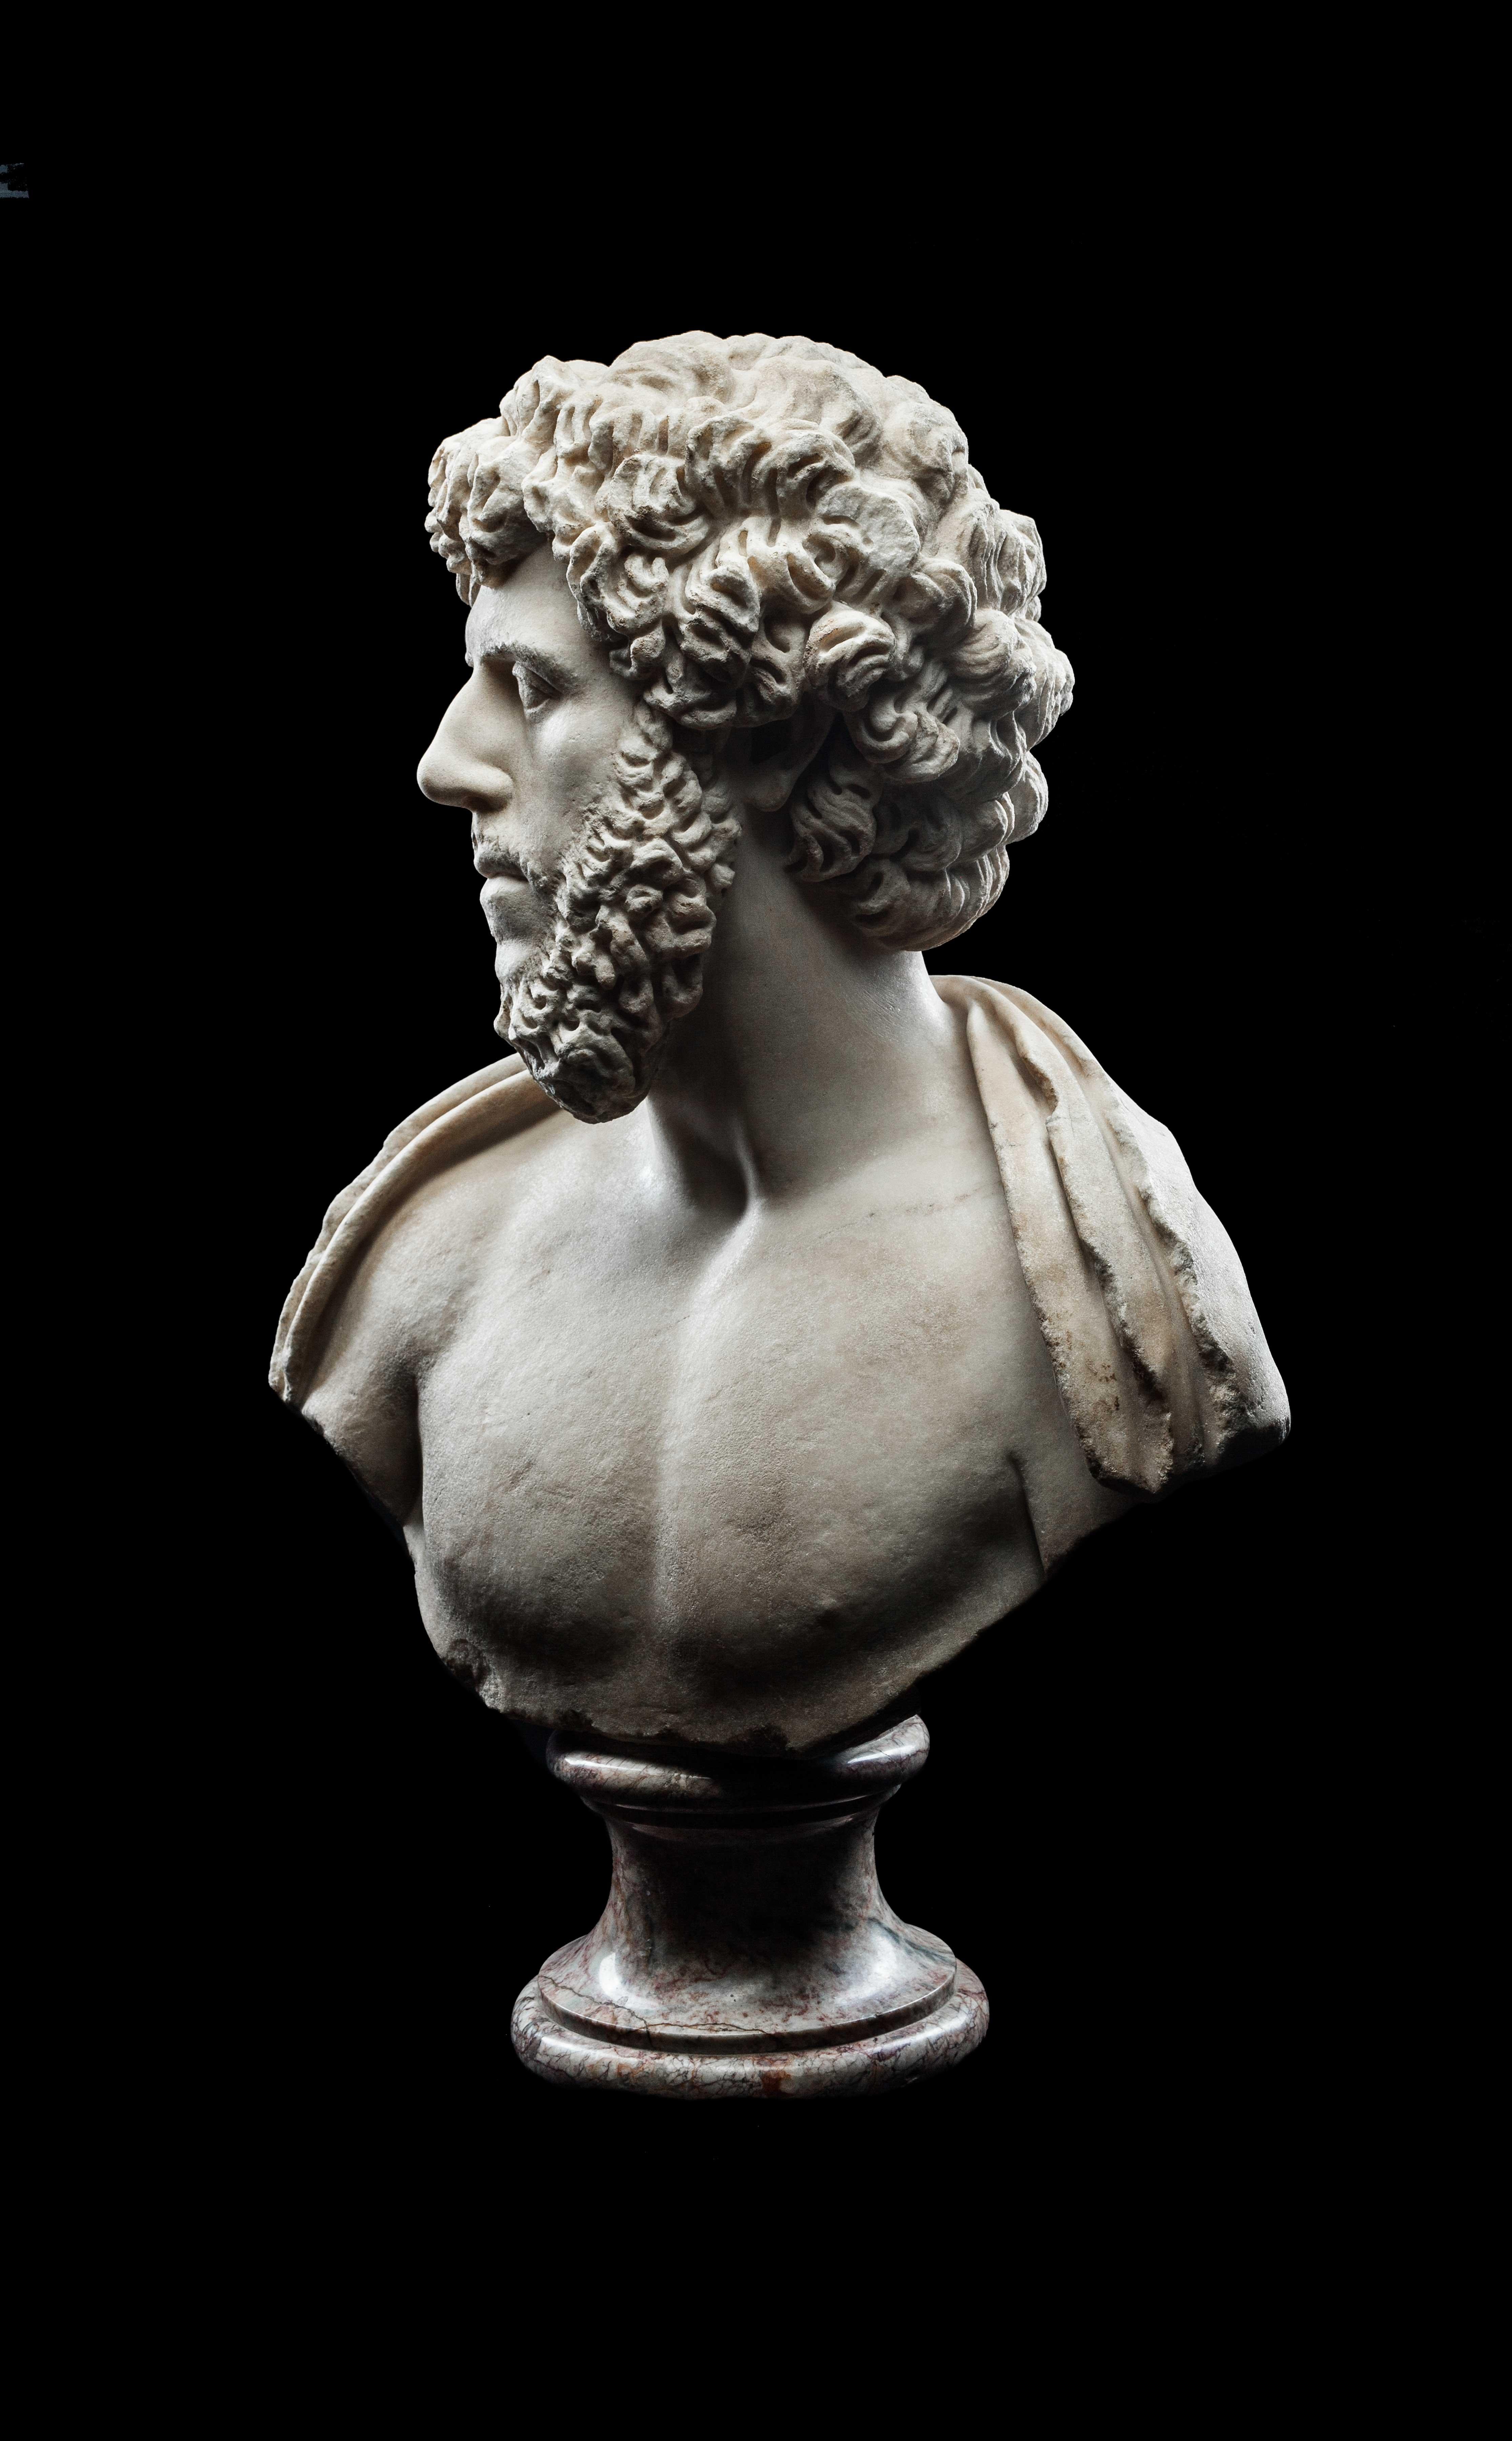 This impressive bust is depicted with head turned slightly to the right and gaze lifted. His eyes are articulated, with the pupils indicated with a drill, giving the face a striking realism. The shoulders are draped with a cloak. Straight brows sit